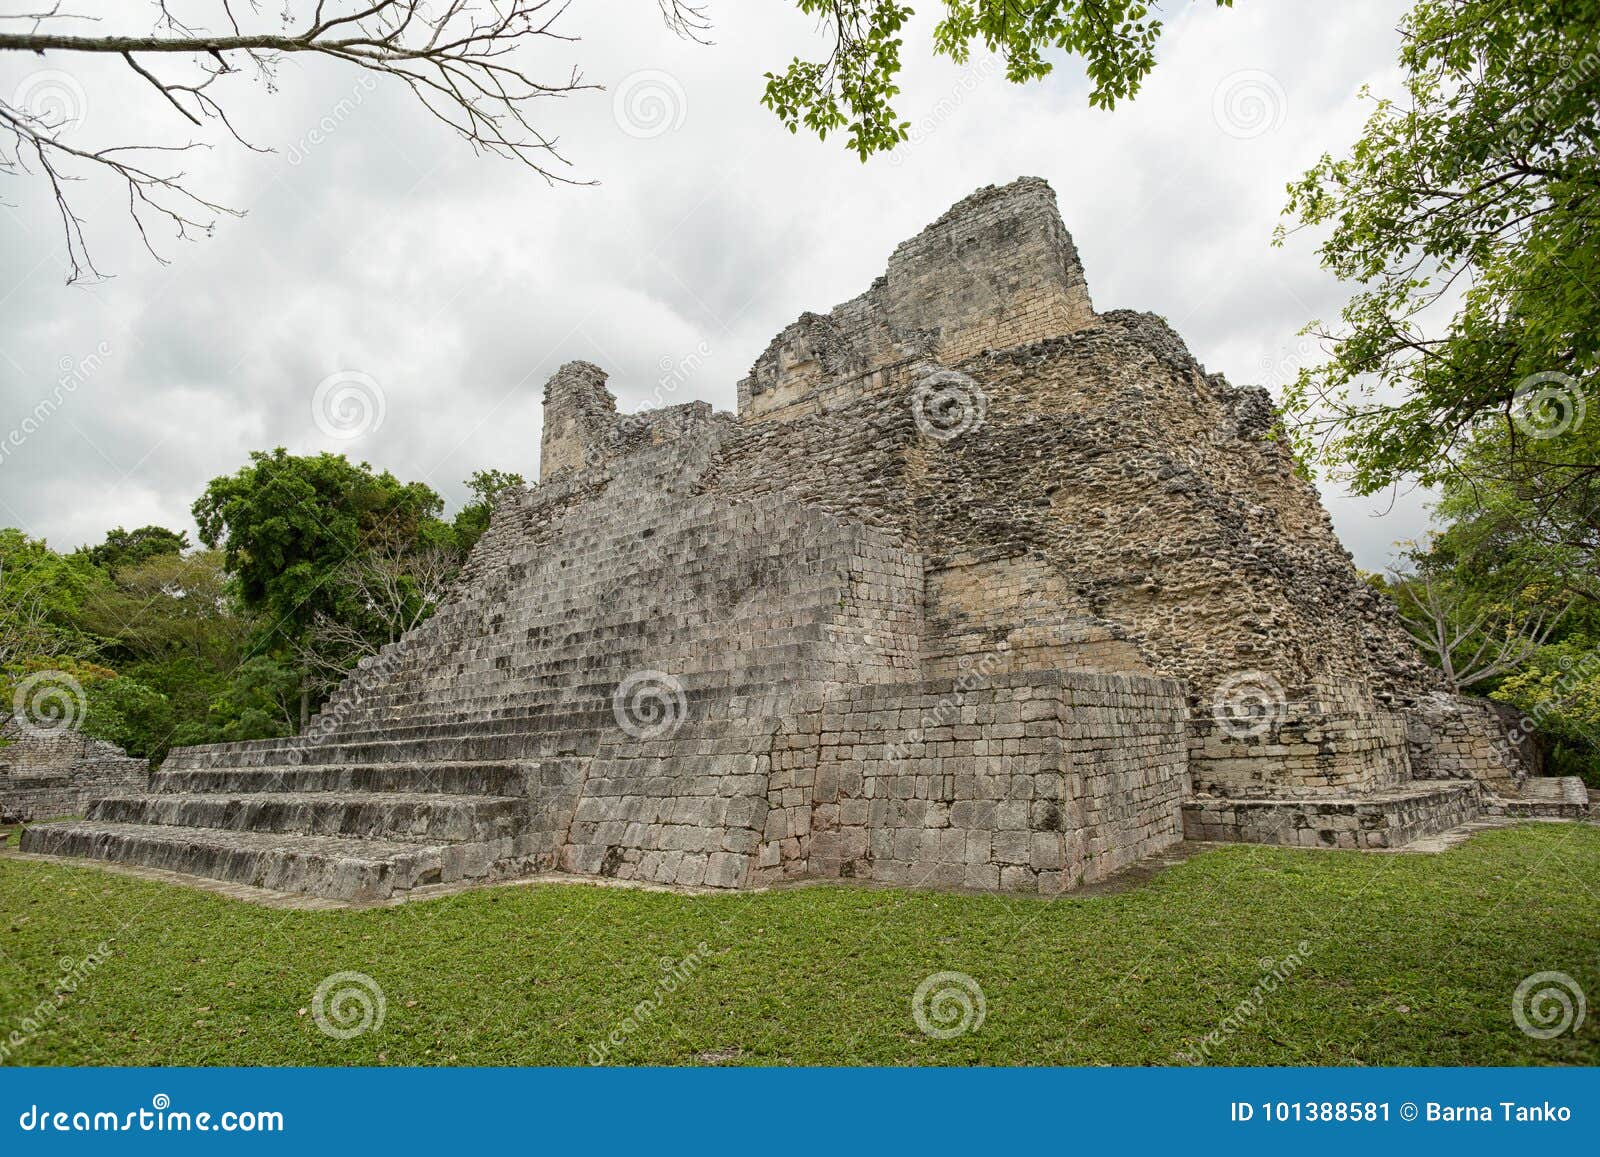 becan archaeological site in mexico